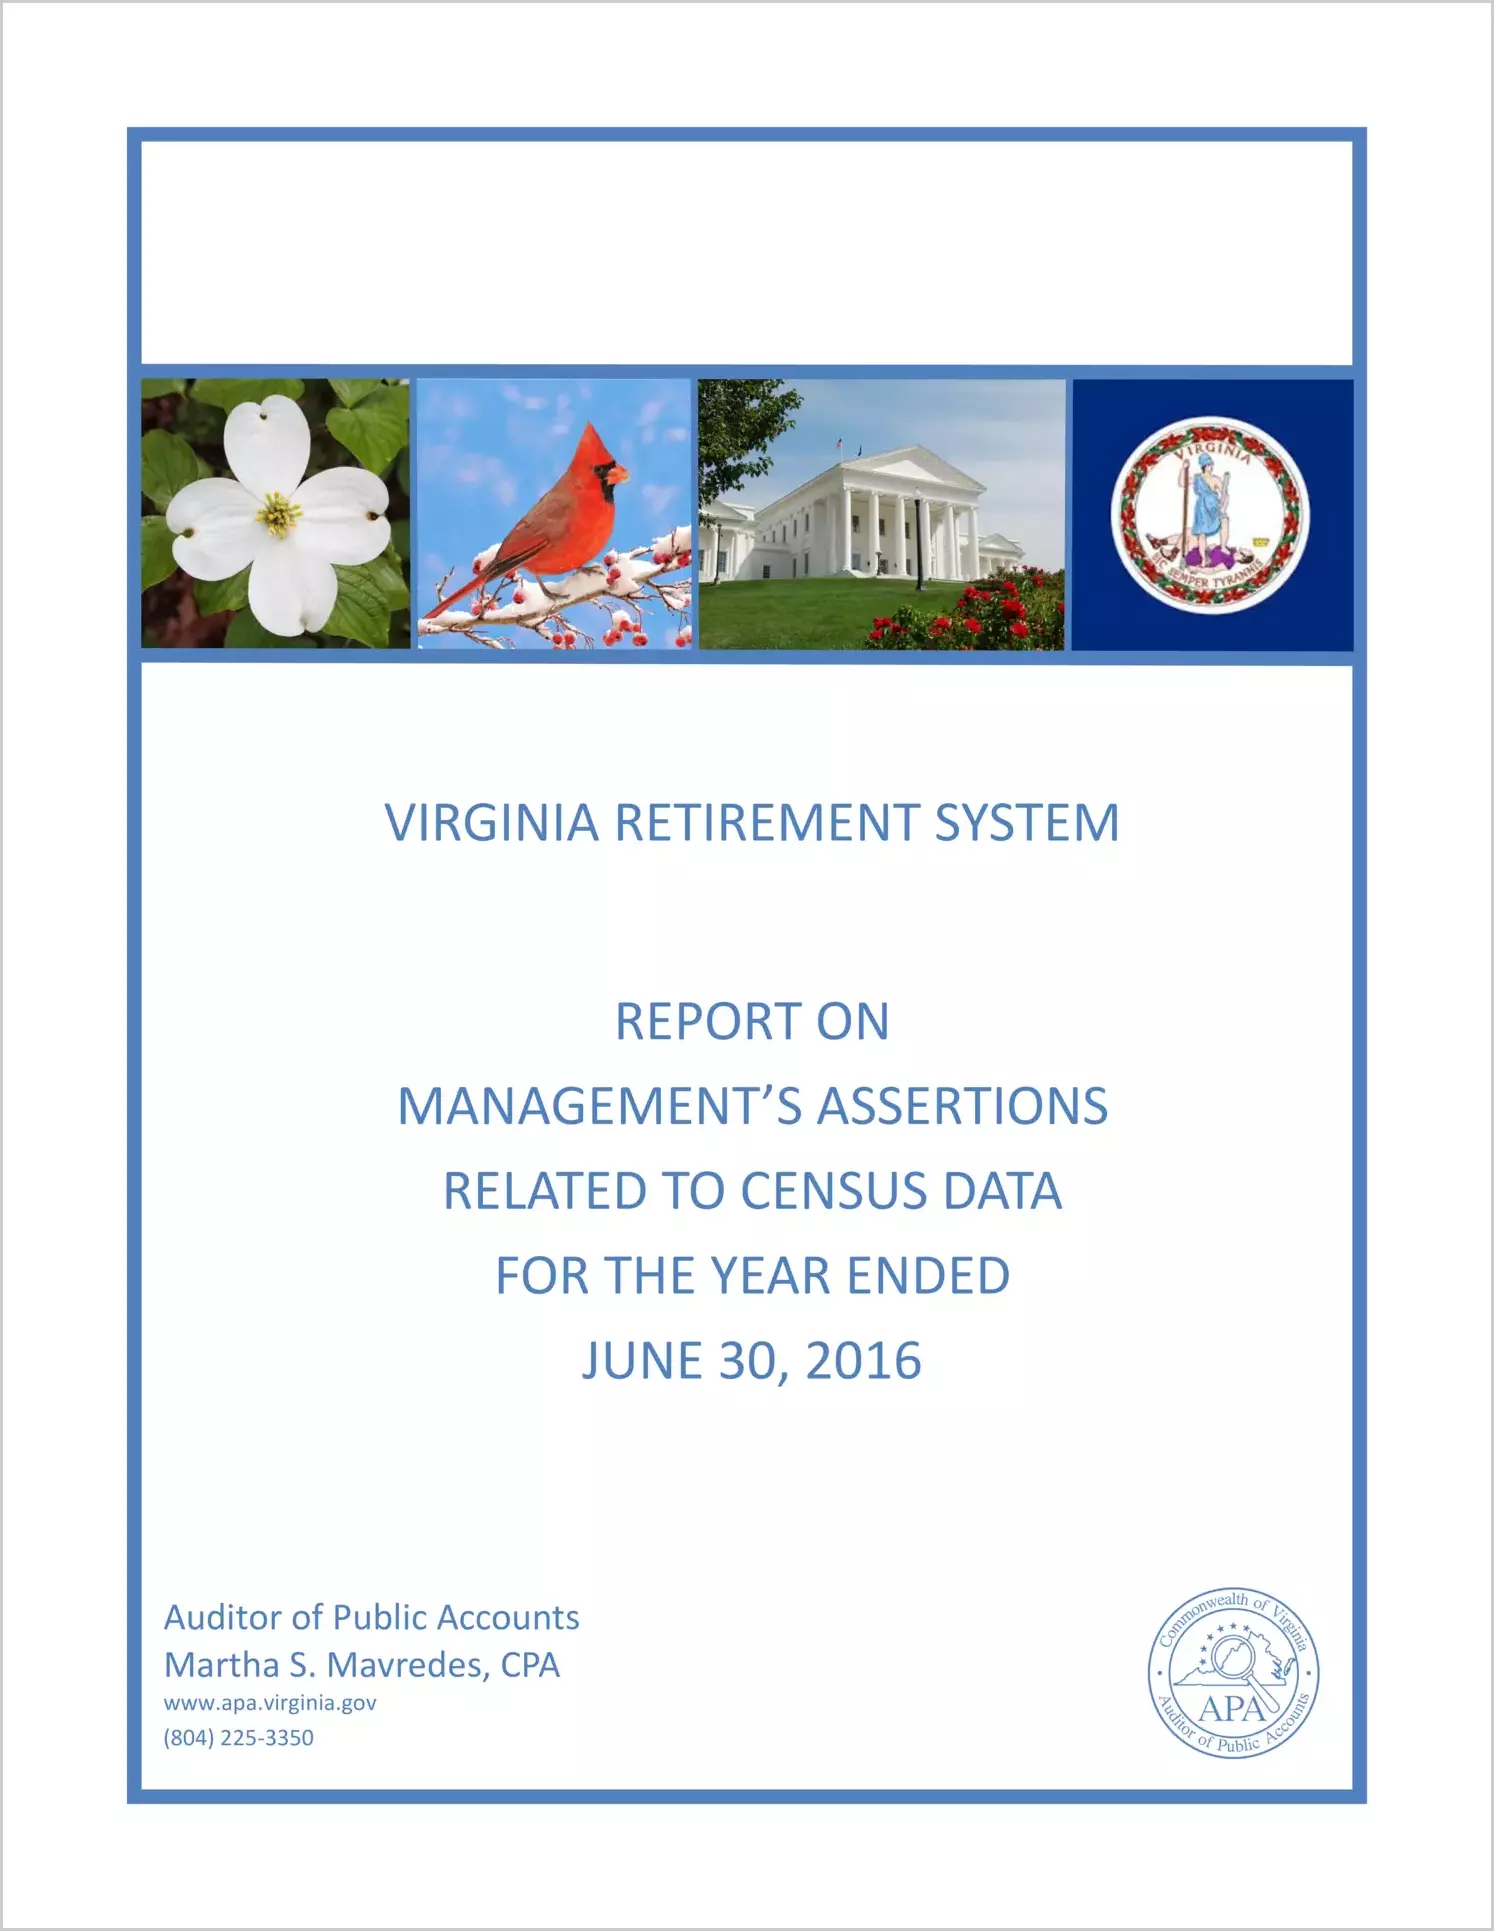 Virginia Retirement System Management's Assertions Related to Census Data for the year ended June 30, 2016